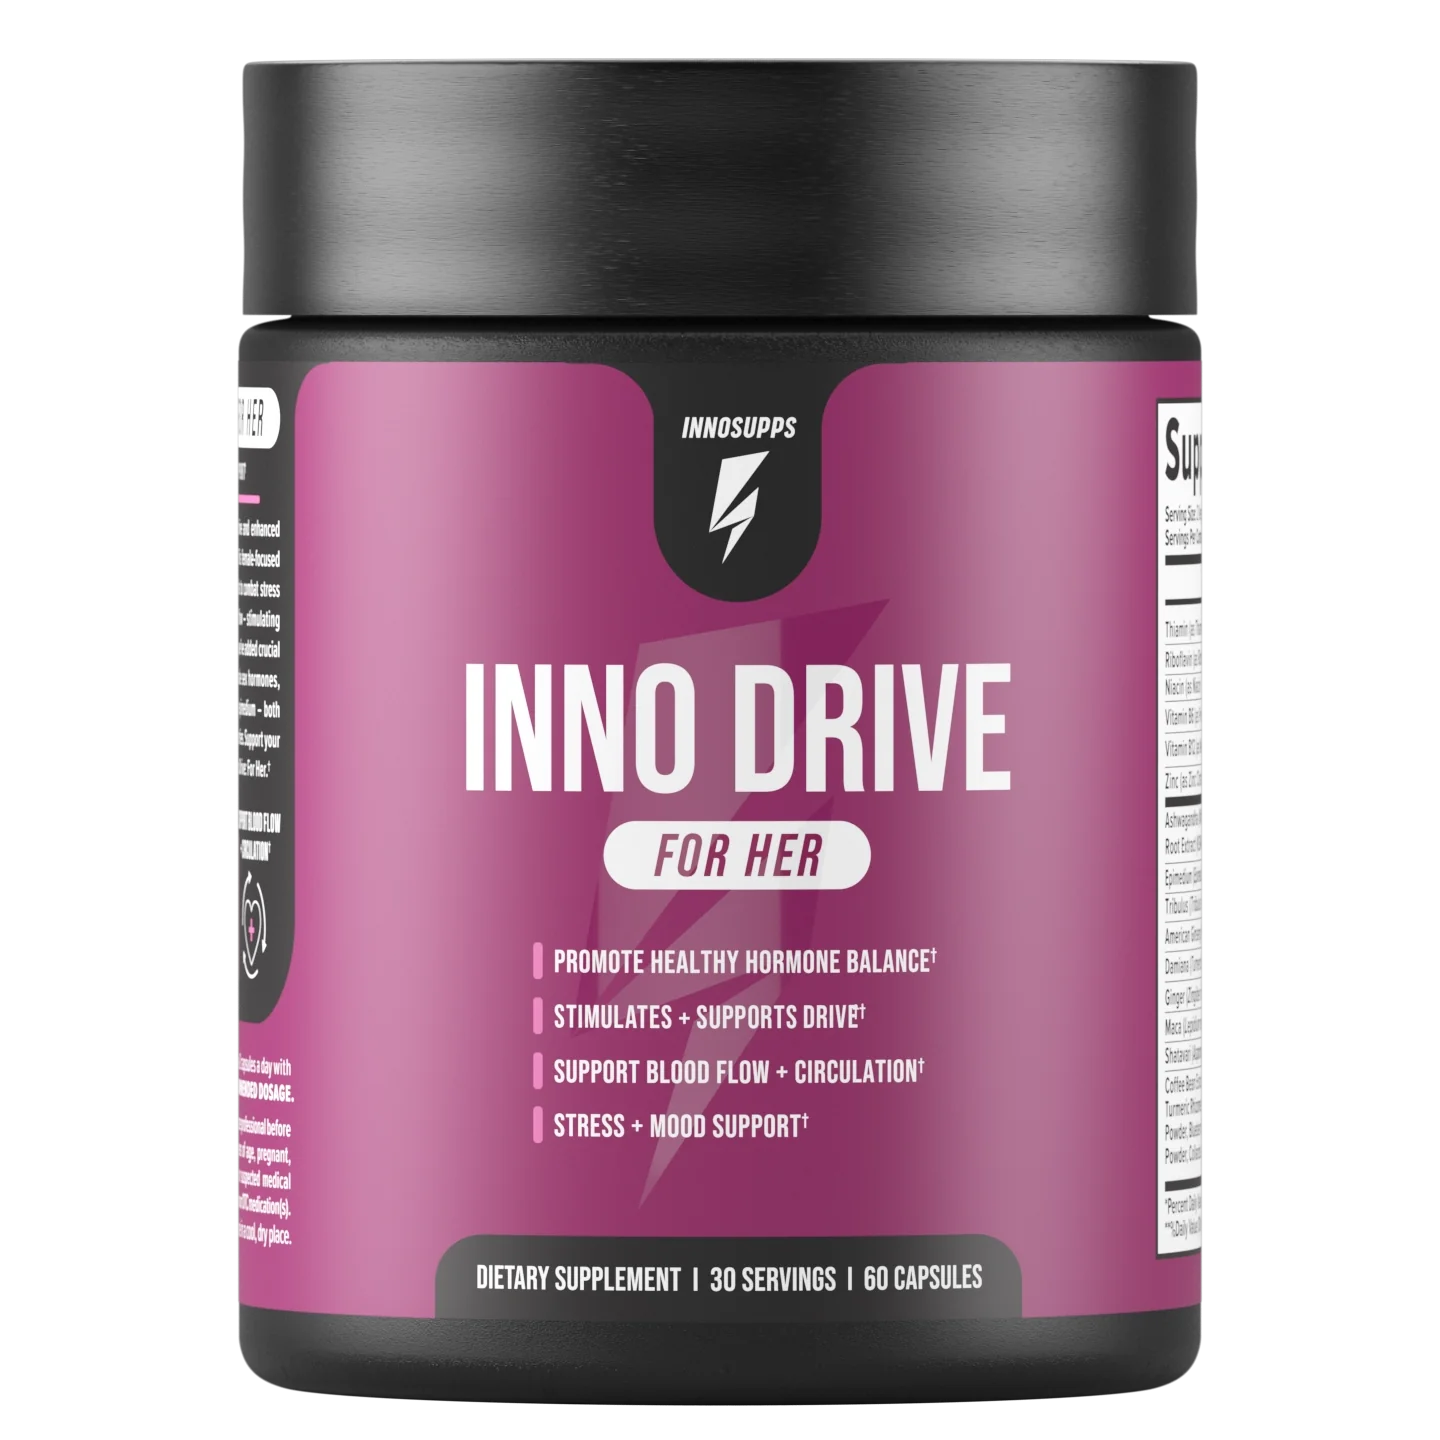 InnoSupps InnoDrive for Her